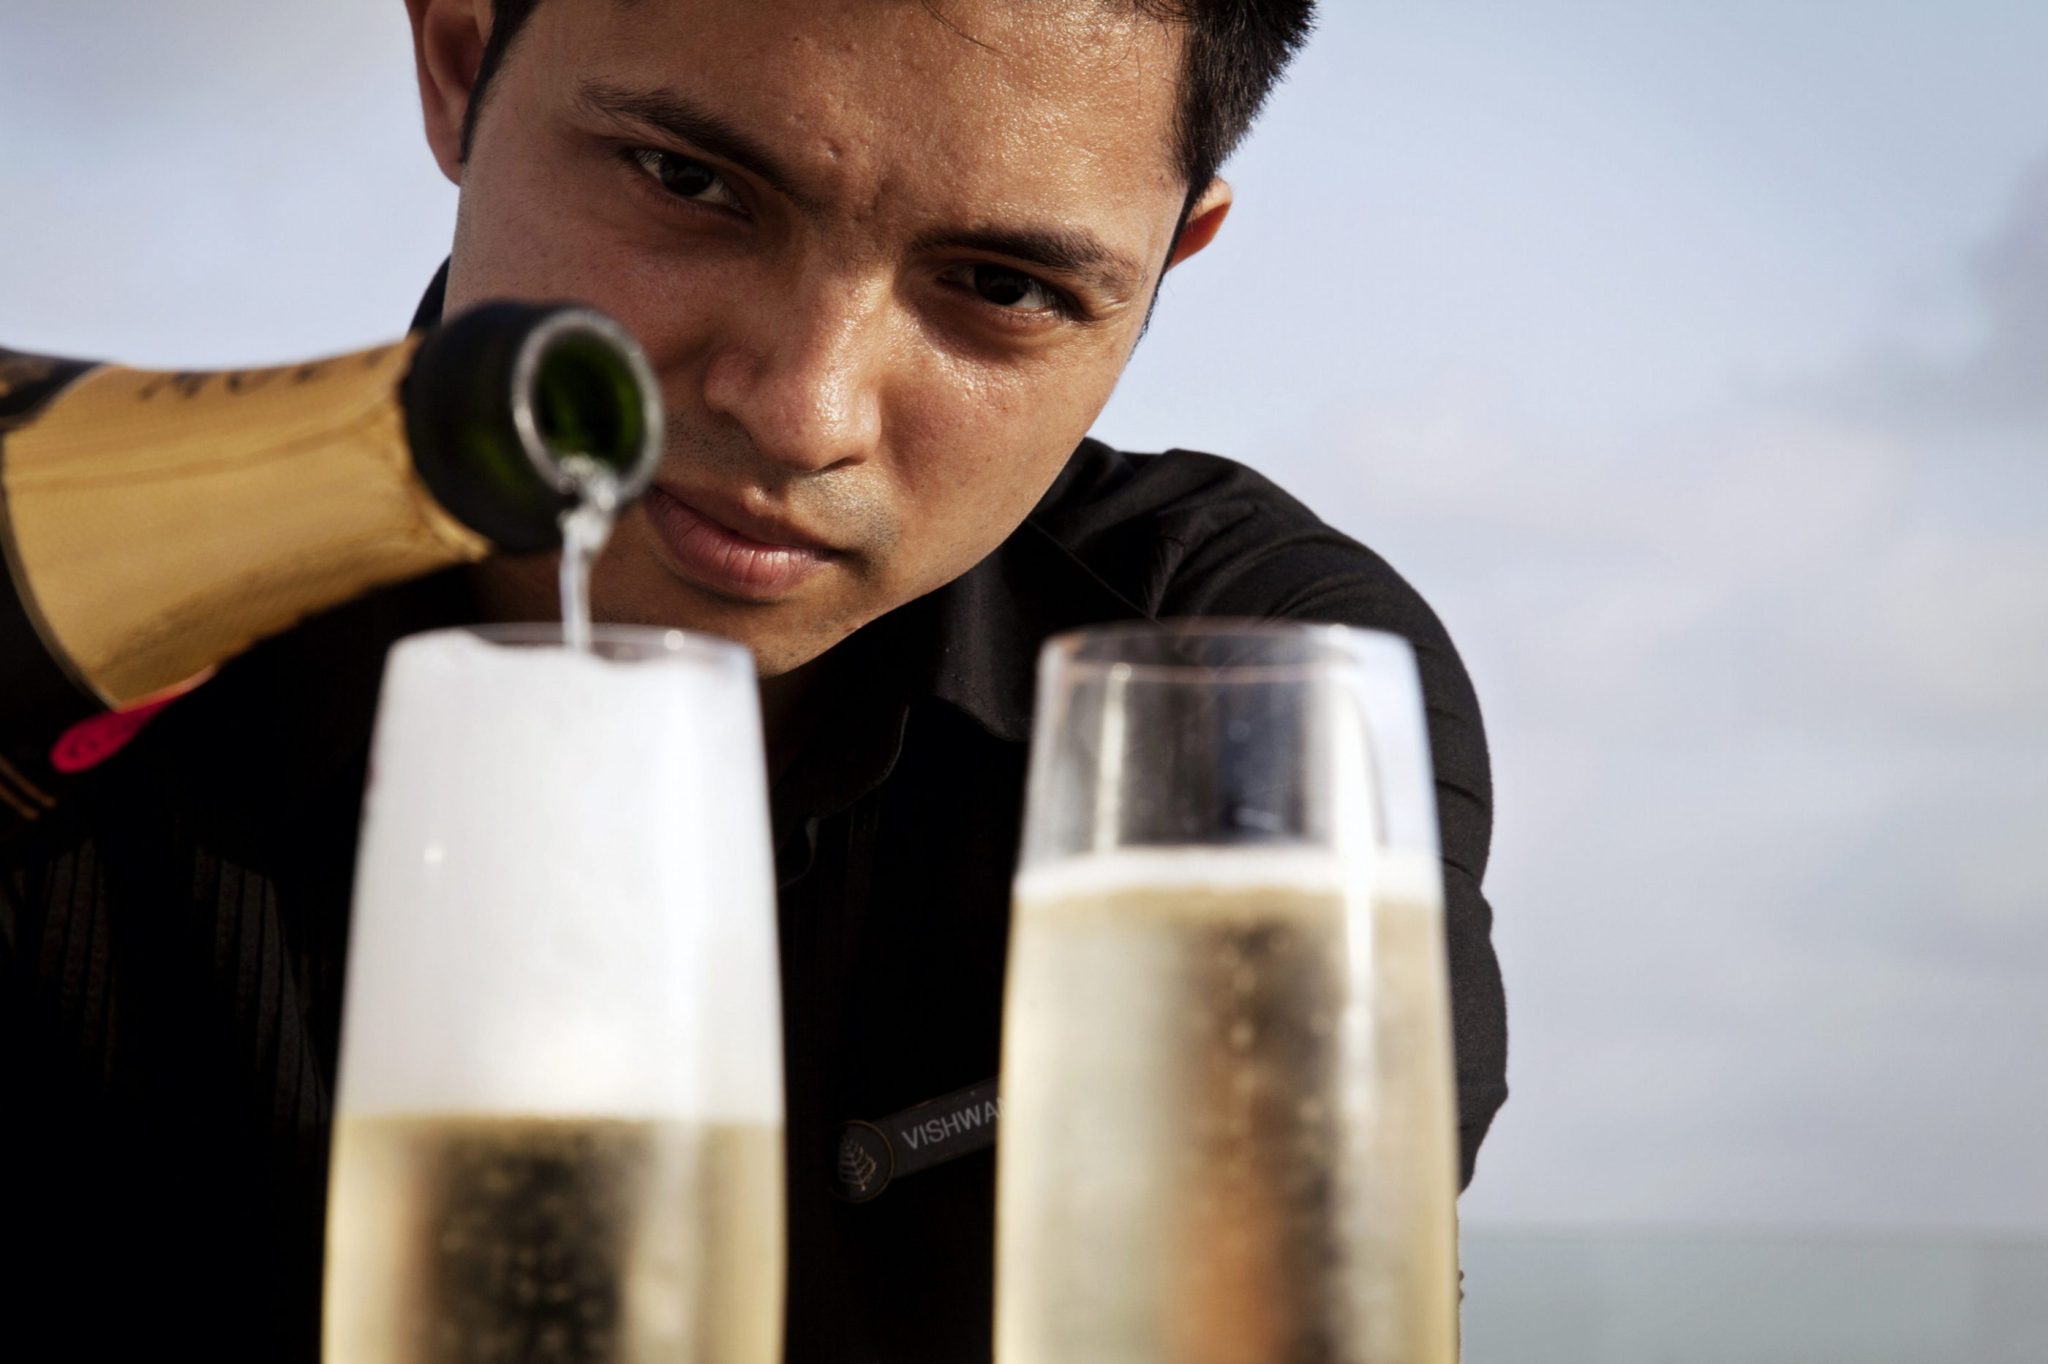 Champagne producers helped by ‘revenge pleasure’ now hurt by inflation